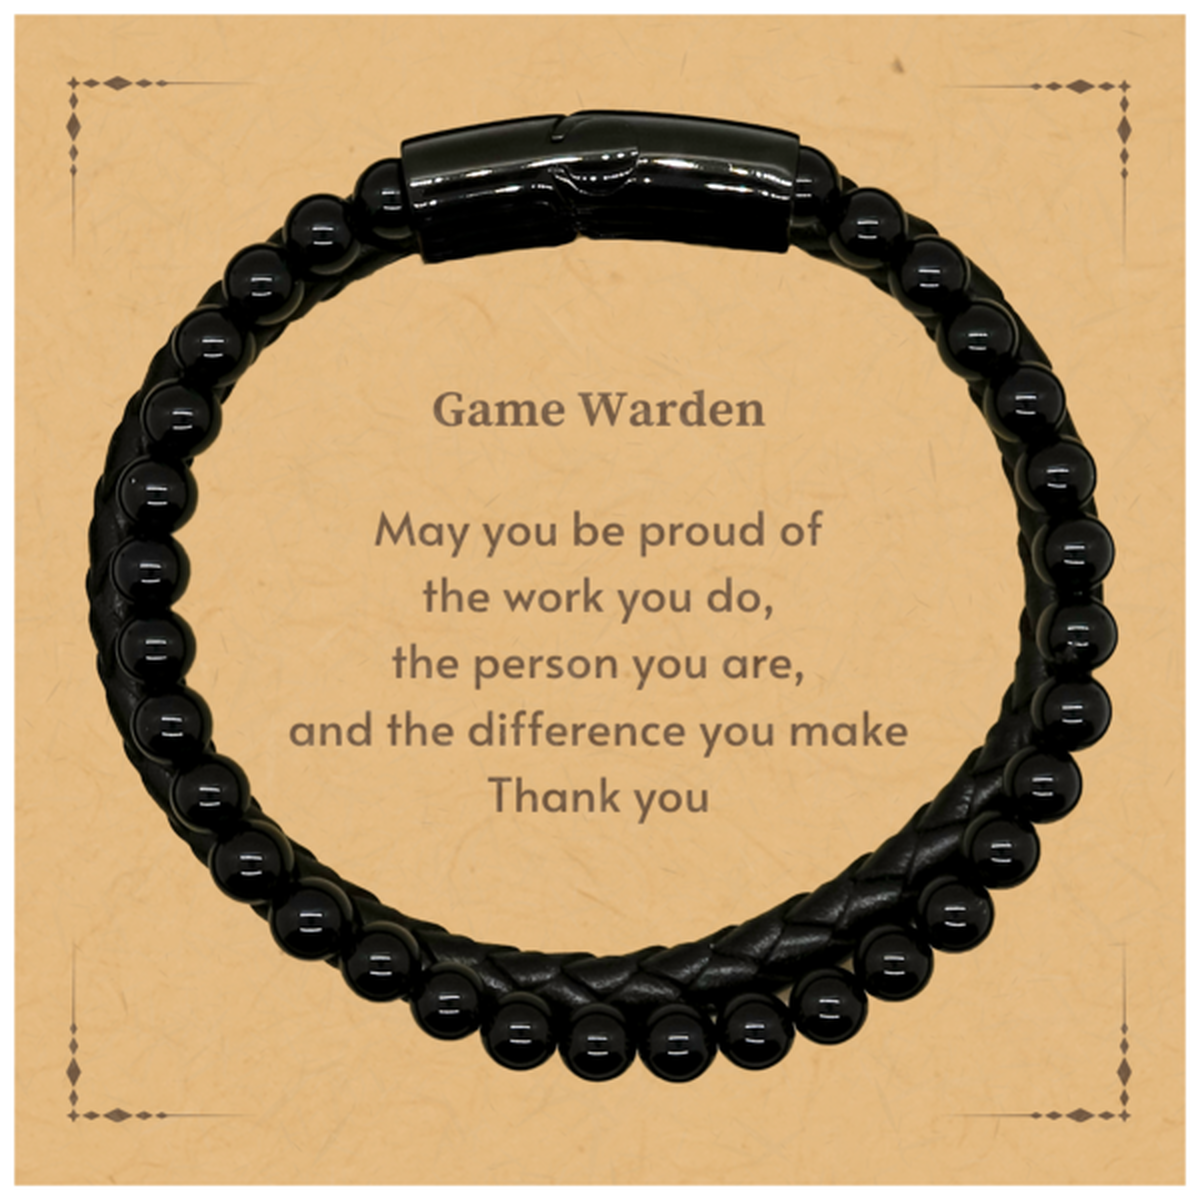 Heartwarming Stone Leather Bracelets Retirement Coworkers Gifts for Game Warden, Game Warden May You be proud of the work you do, the person you are Gifts for Boss Men Women Friends